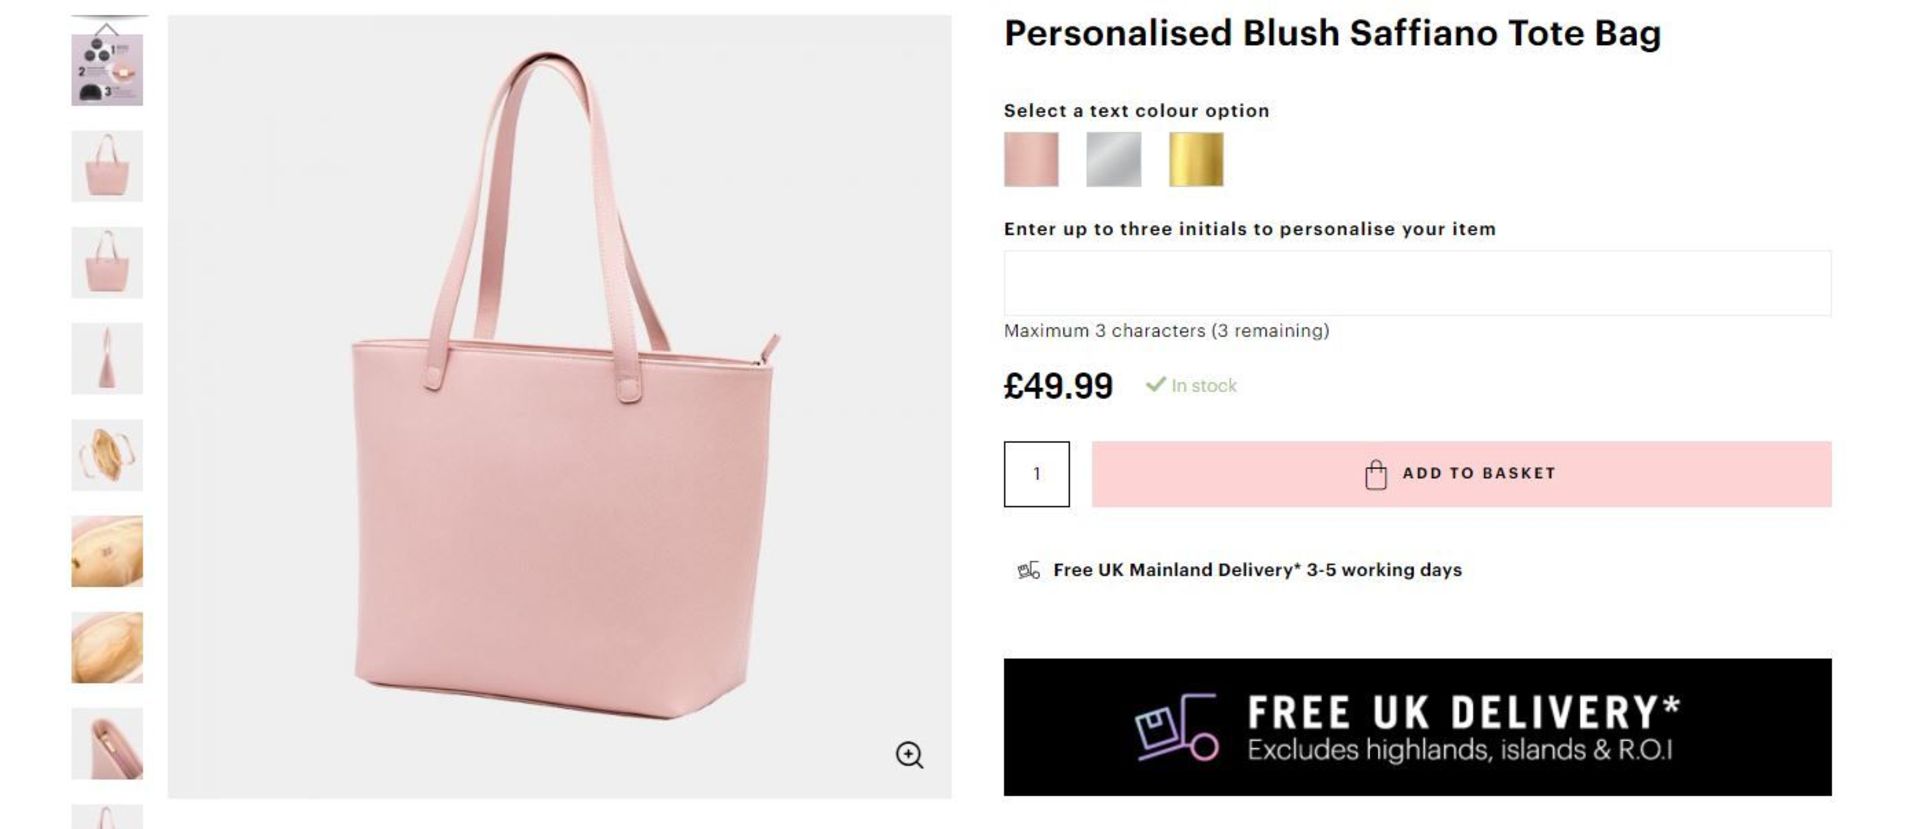 2 x NEW PACKAGED Beauti Saffiano Tote -Nude. RRP £49.99 each. Note: Item is not personalised.